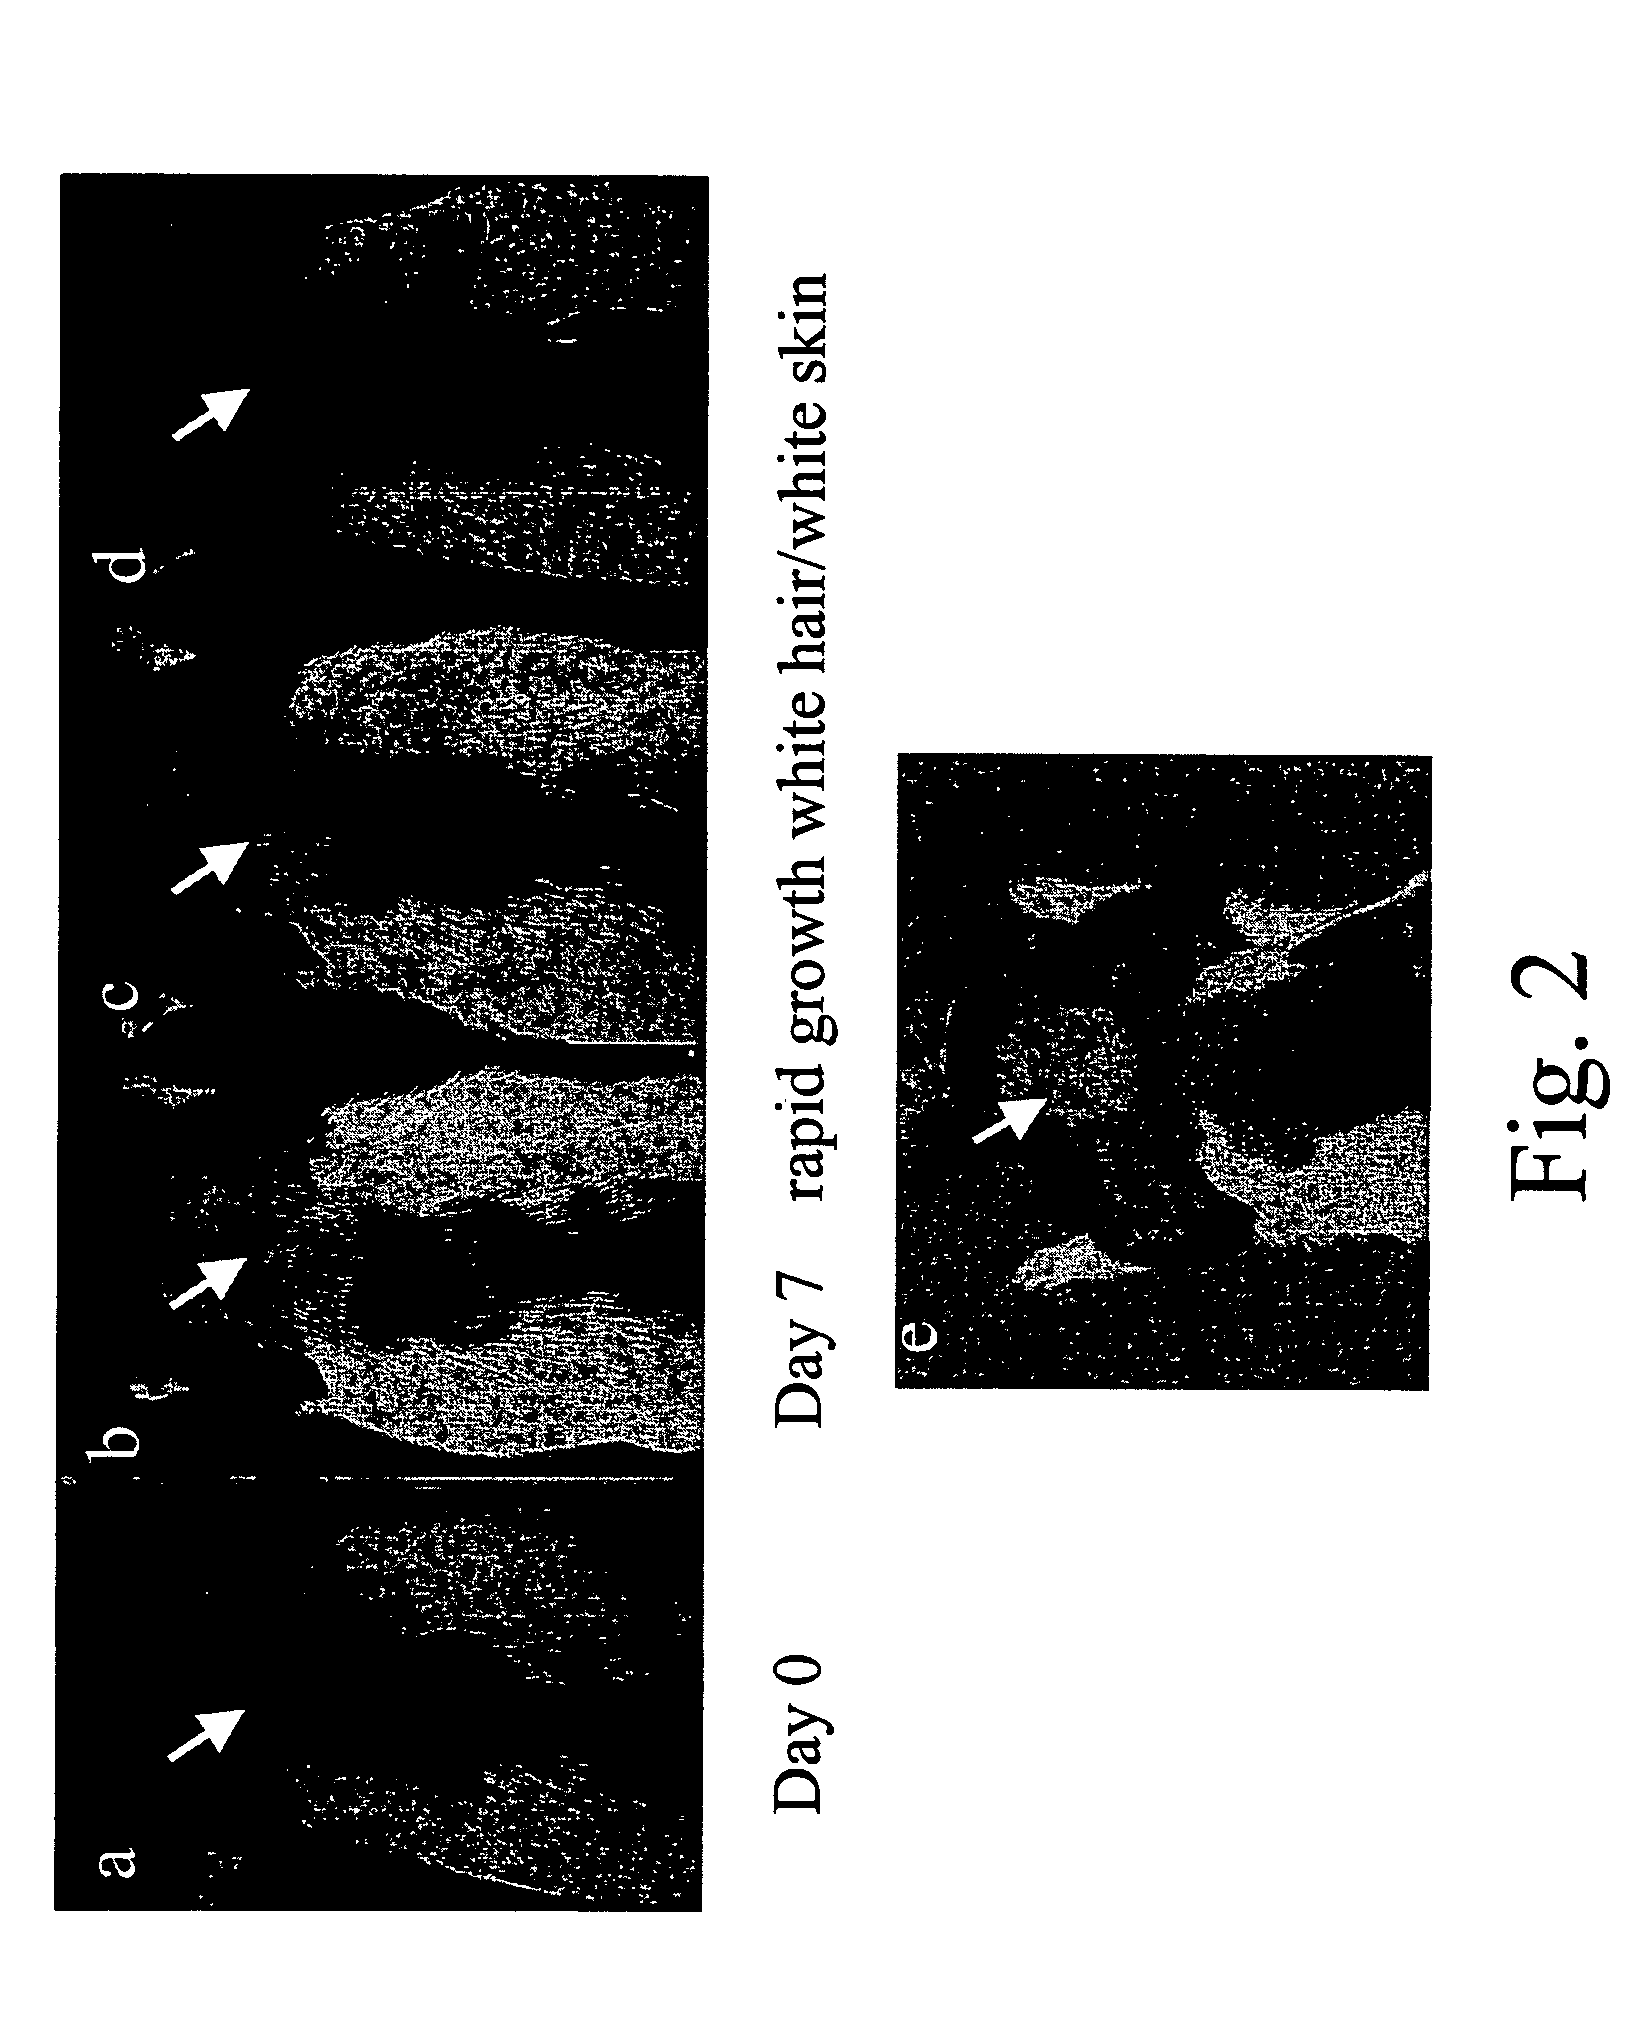 Method for regulating the skin and hair color in a post-natal mammal